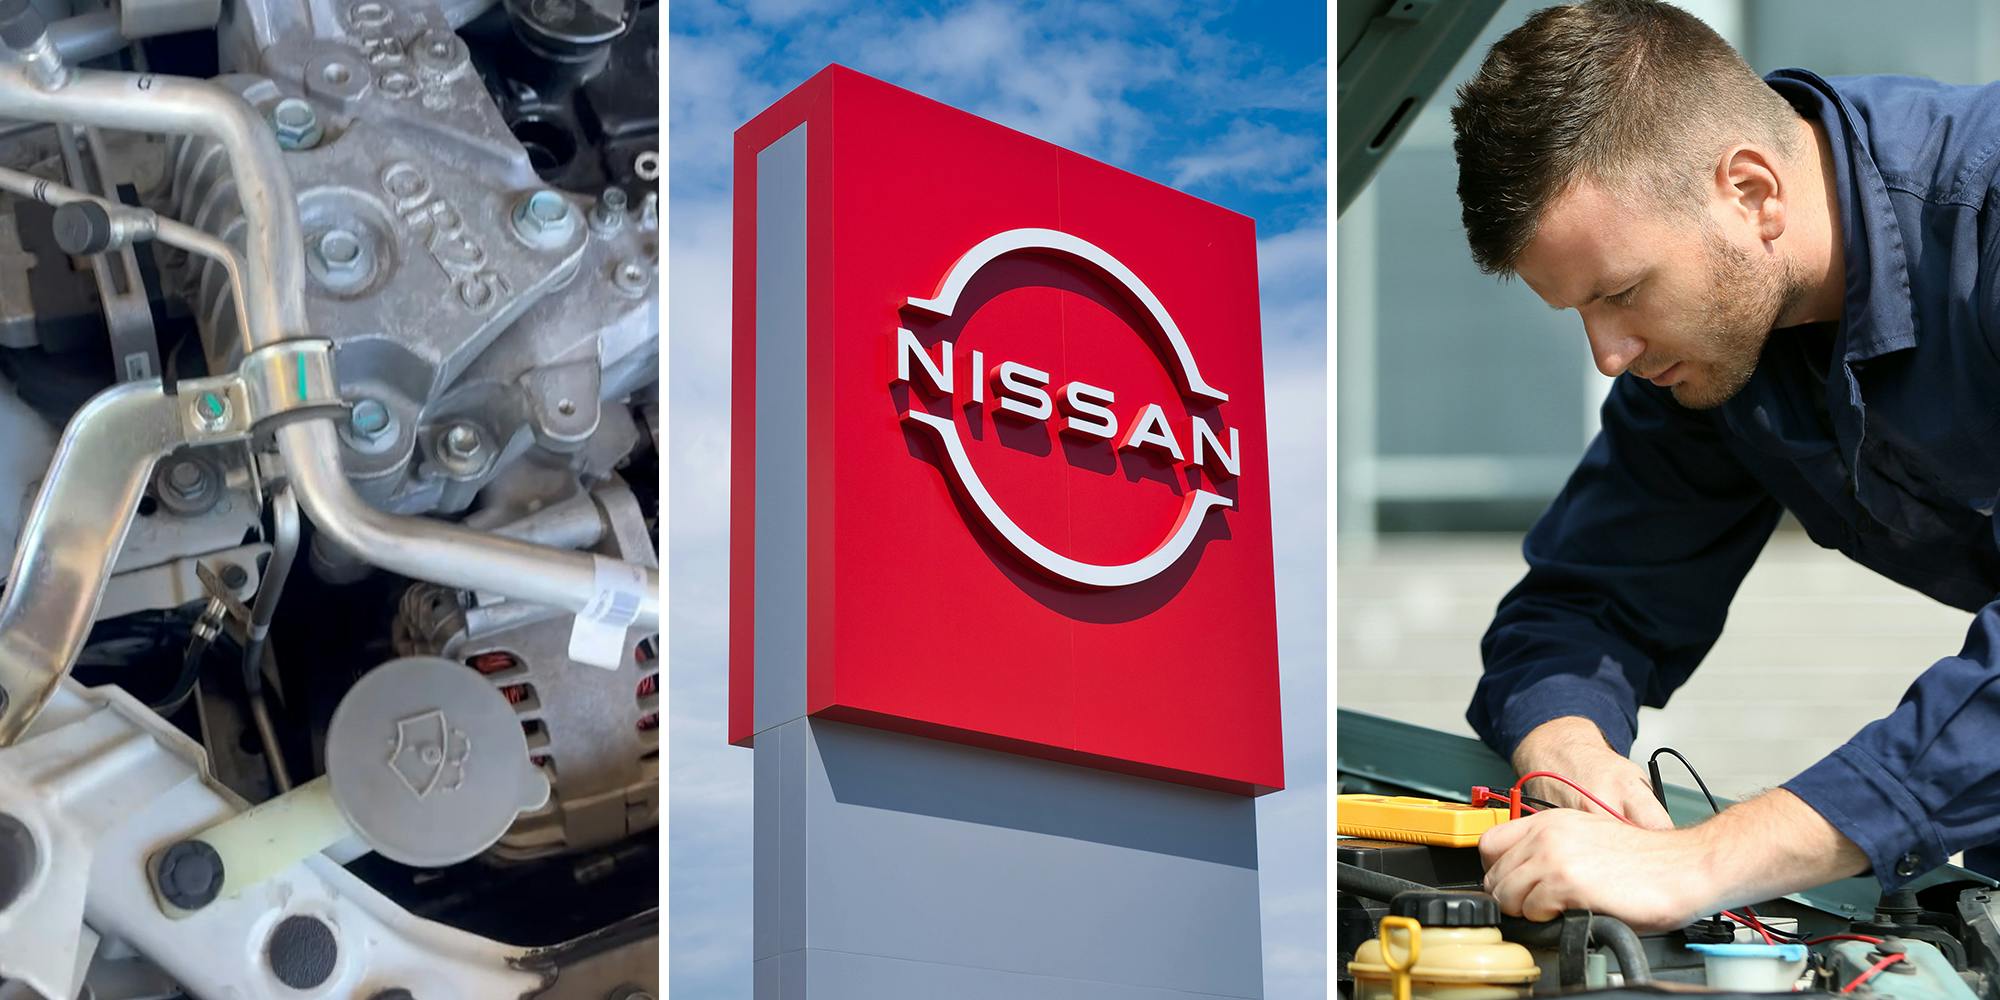 ‘Old cars sure are looking more appealing to own’: Mechanic issues warning about Nissans after failing to be able to work on one